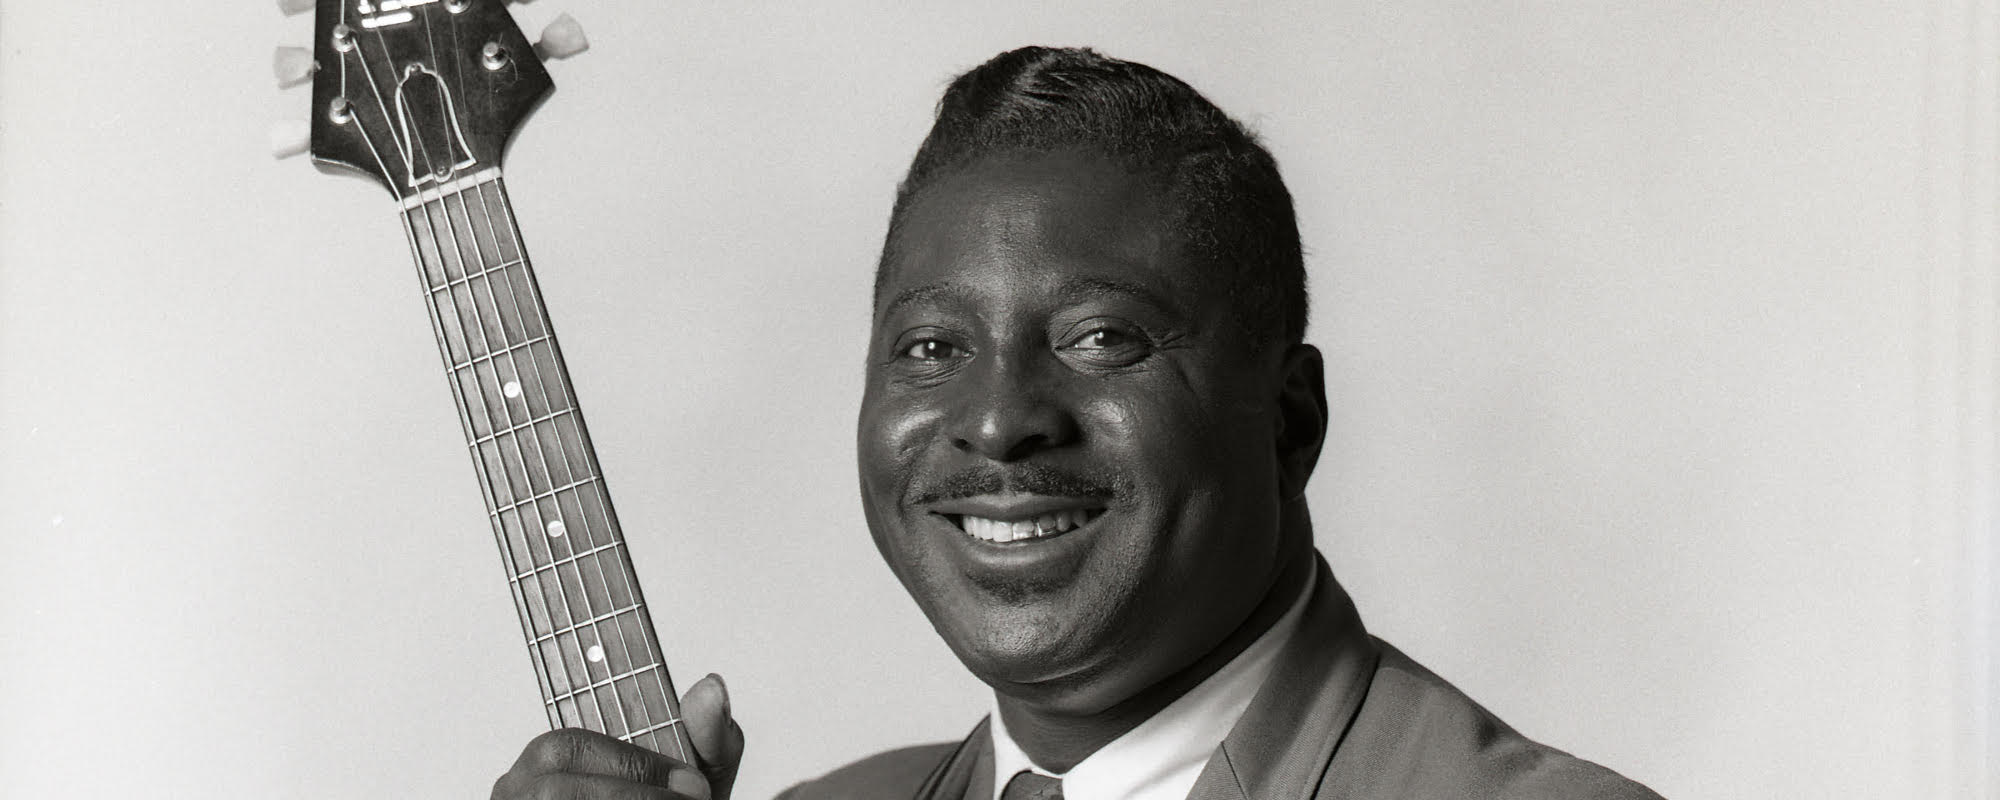 Review: Albert King’s Blues Classic ‘Born Under a Bad Sign’ Returns